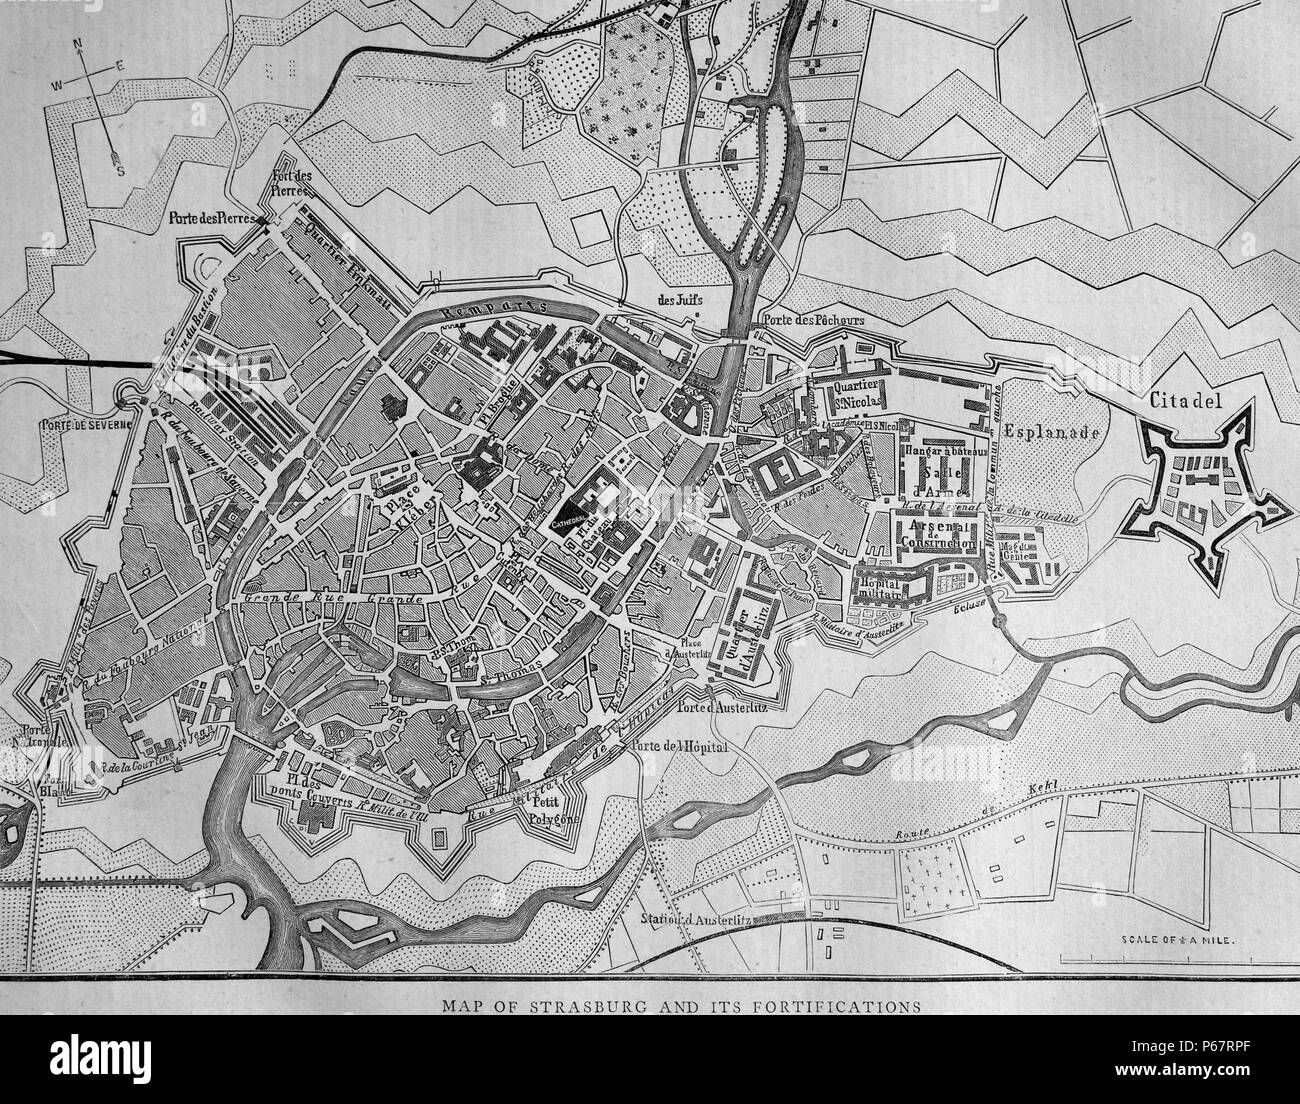 Map of Strasburg and it's fortifications. Strasburg is a town in the Vorpommern-Greifswald district of Mecklenburg-Vorpommern, Germany. Dated 1870 Stock Photo